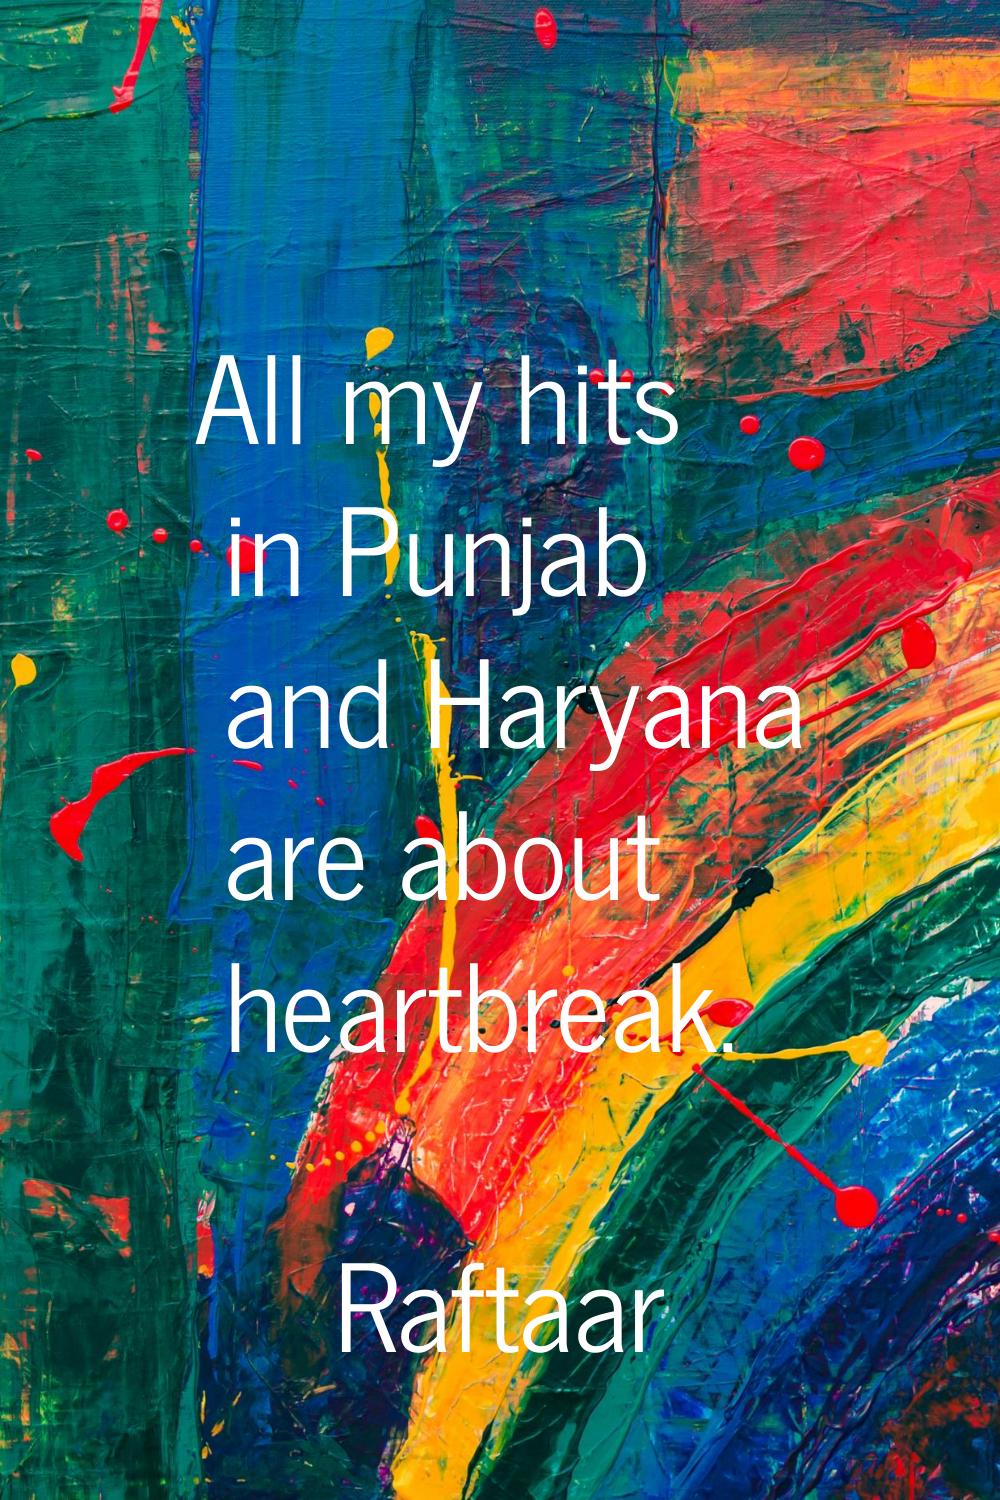 All my hits in Punjab and Haryana are about heartbreak.